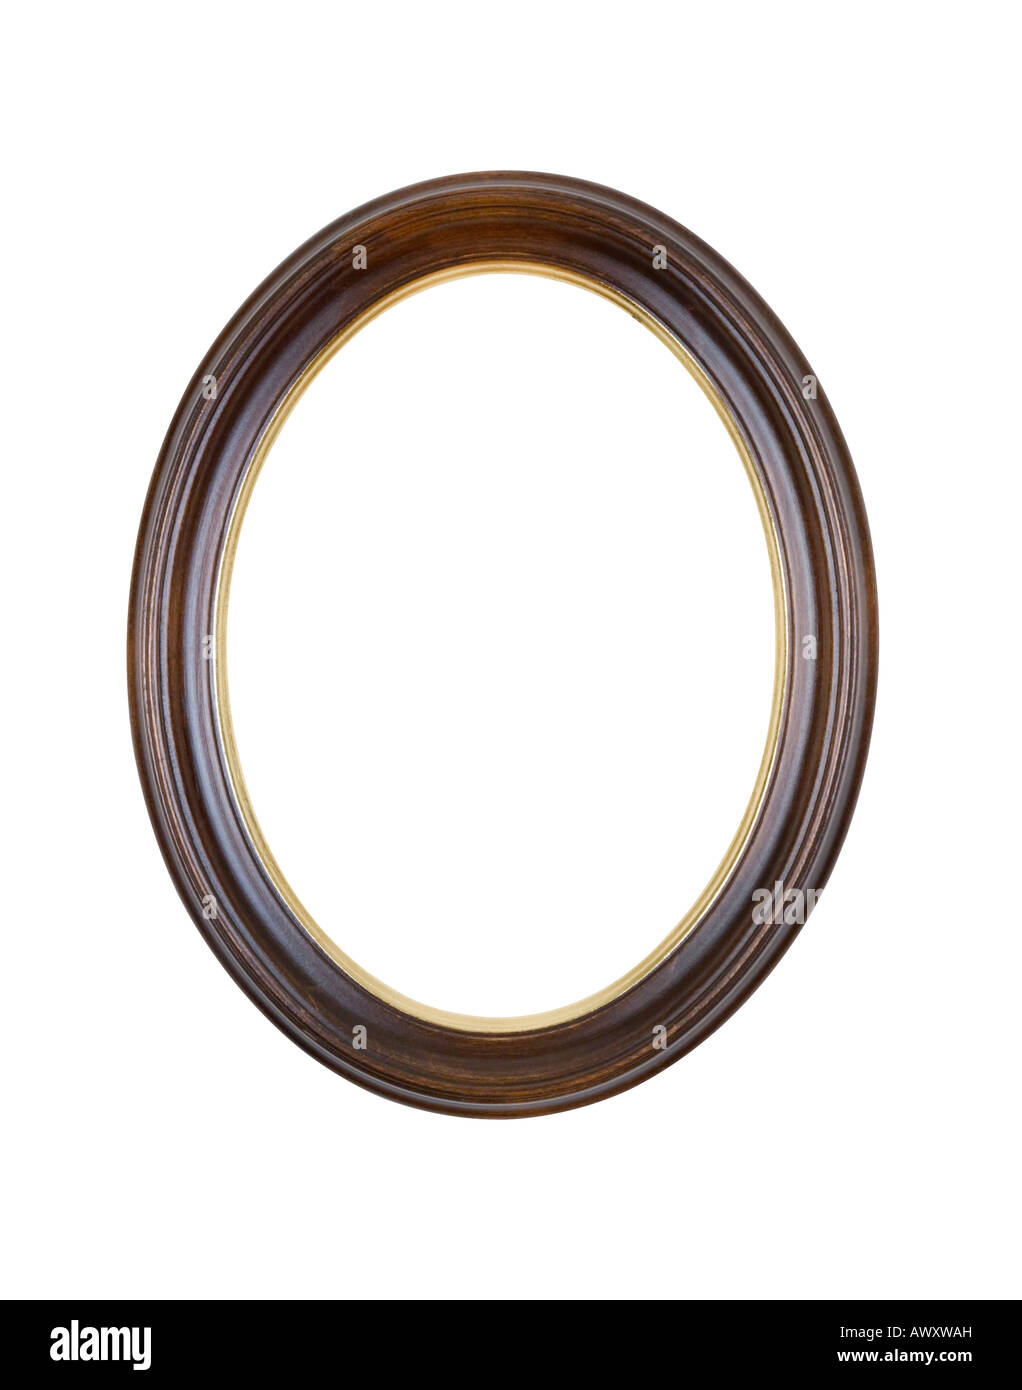 Picture frame oval brown wood, uneven stain and lacquer finish, isolated on white background. Stock Photo